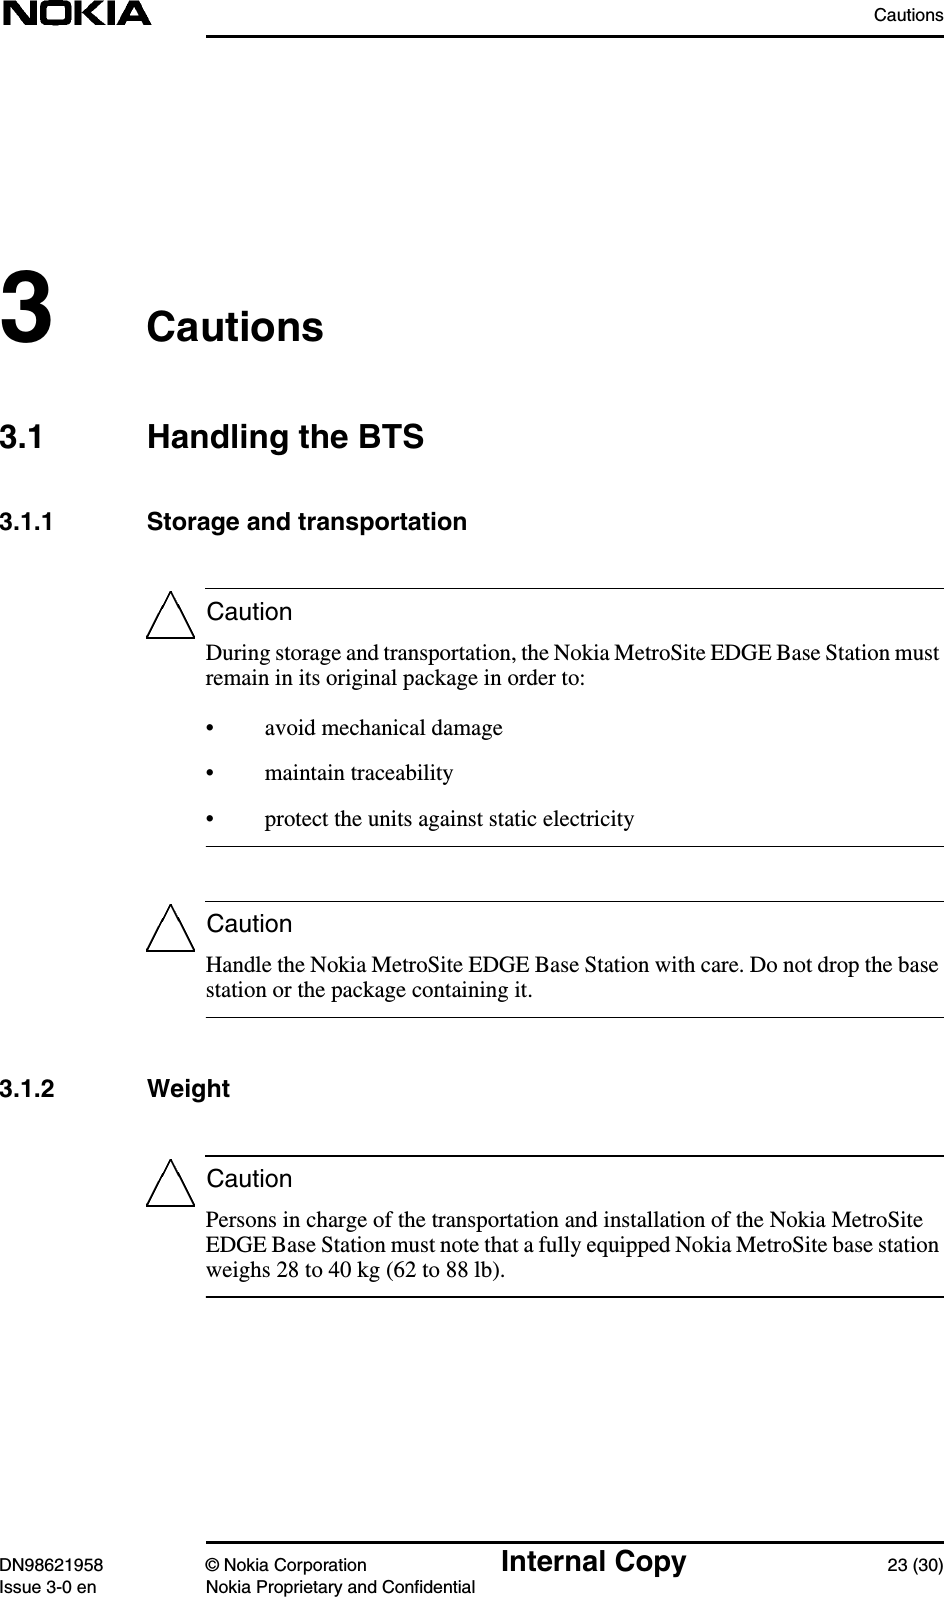 CautionsDN98621958 © Nokia Corporation Internal Copy 23 (30)Issue 3-0 en Nokia Proprietary and ConfidentialCautionCautionCaution3Cautions3.1 Handling the BTS3.1.1 Storage and transportationDuring storage and transportation, the Nokia MetroSite EDGE Base Station mustremain in its original package in order to:• avoid mechanical damage• maintain traceability• protect the units against static electricityHandle the Nokia MetroSite EDGE Base Station with care. Do not drop the basestation or the package containing it.3.1.2 WeightPersons in charge of the transportation and installation of the Nokia MetroSiteEDGE Base Station must note that a fully equipped Nokia MetroSite base stationweighs 28 to 40 kg (62 to 88 lb).